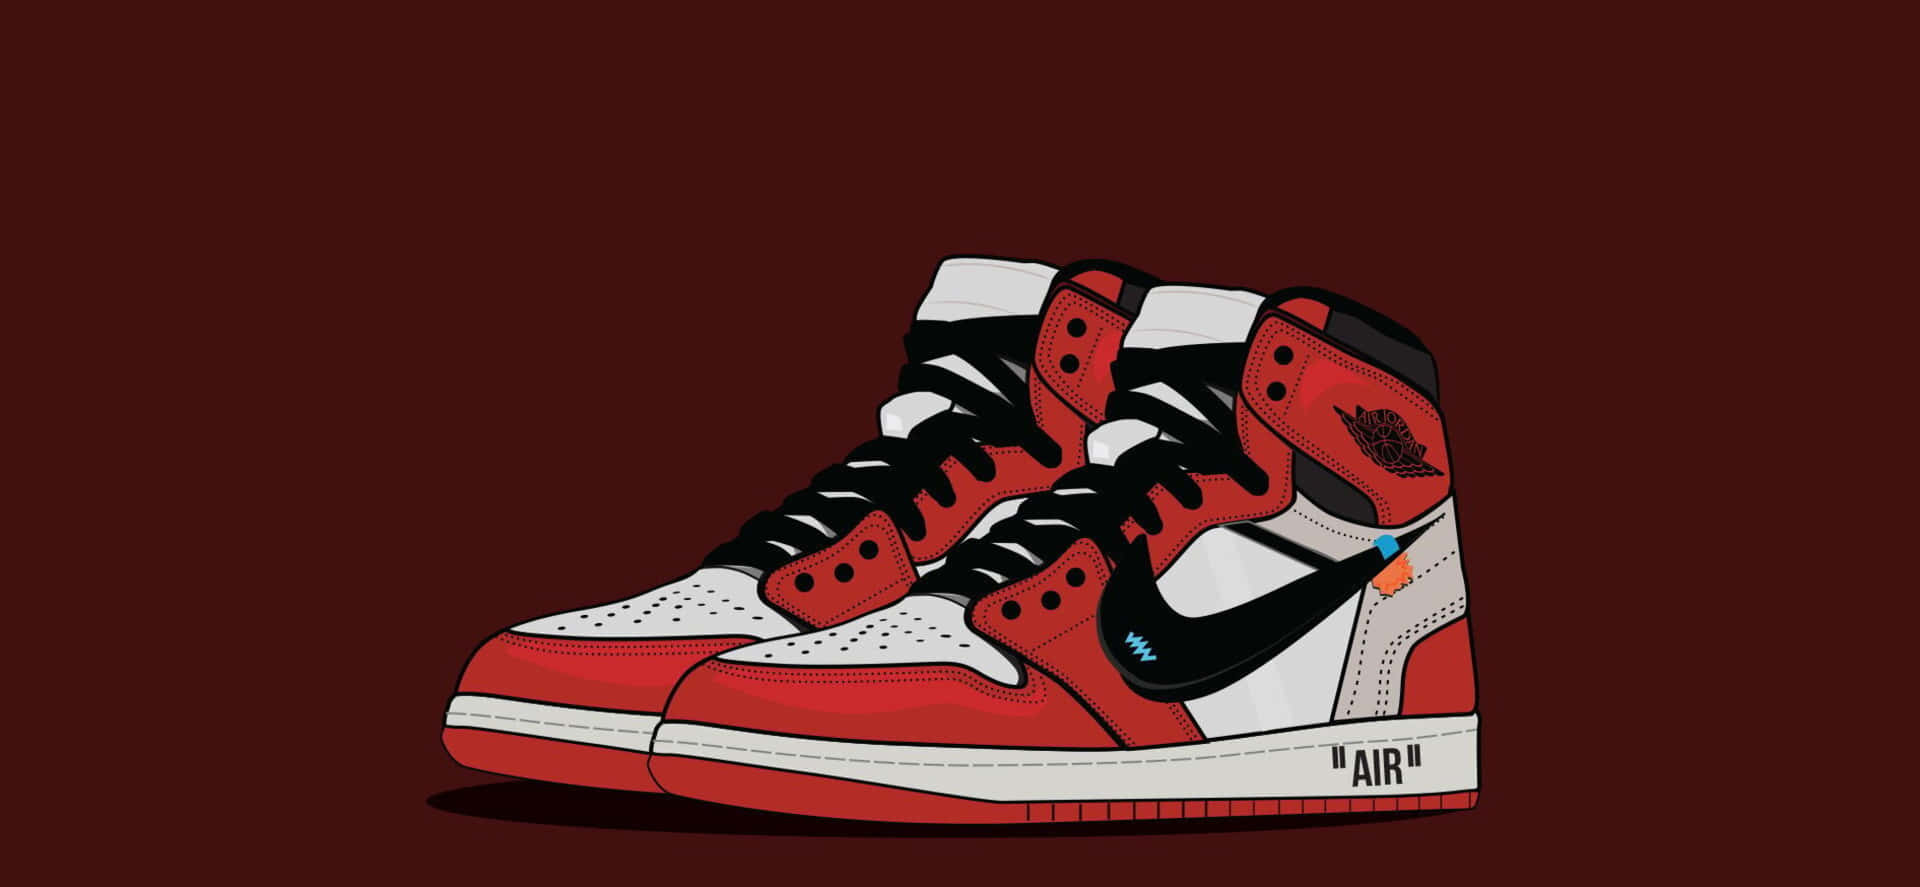 Download The iconic Nike Air Jordan shoes – a classic staple of street ...